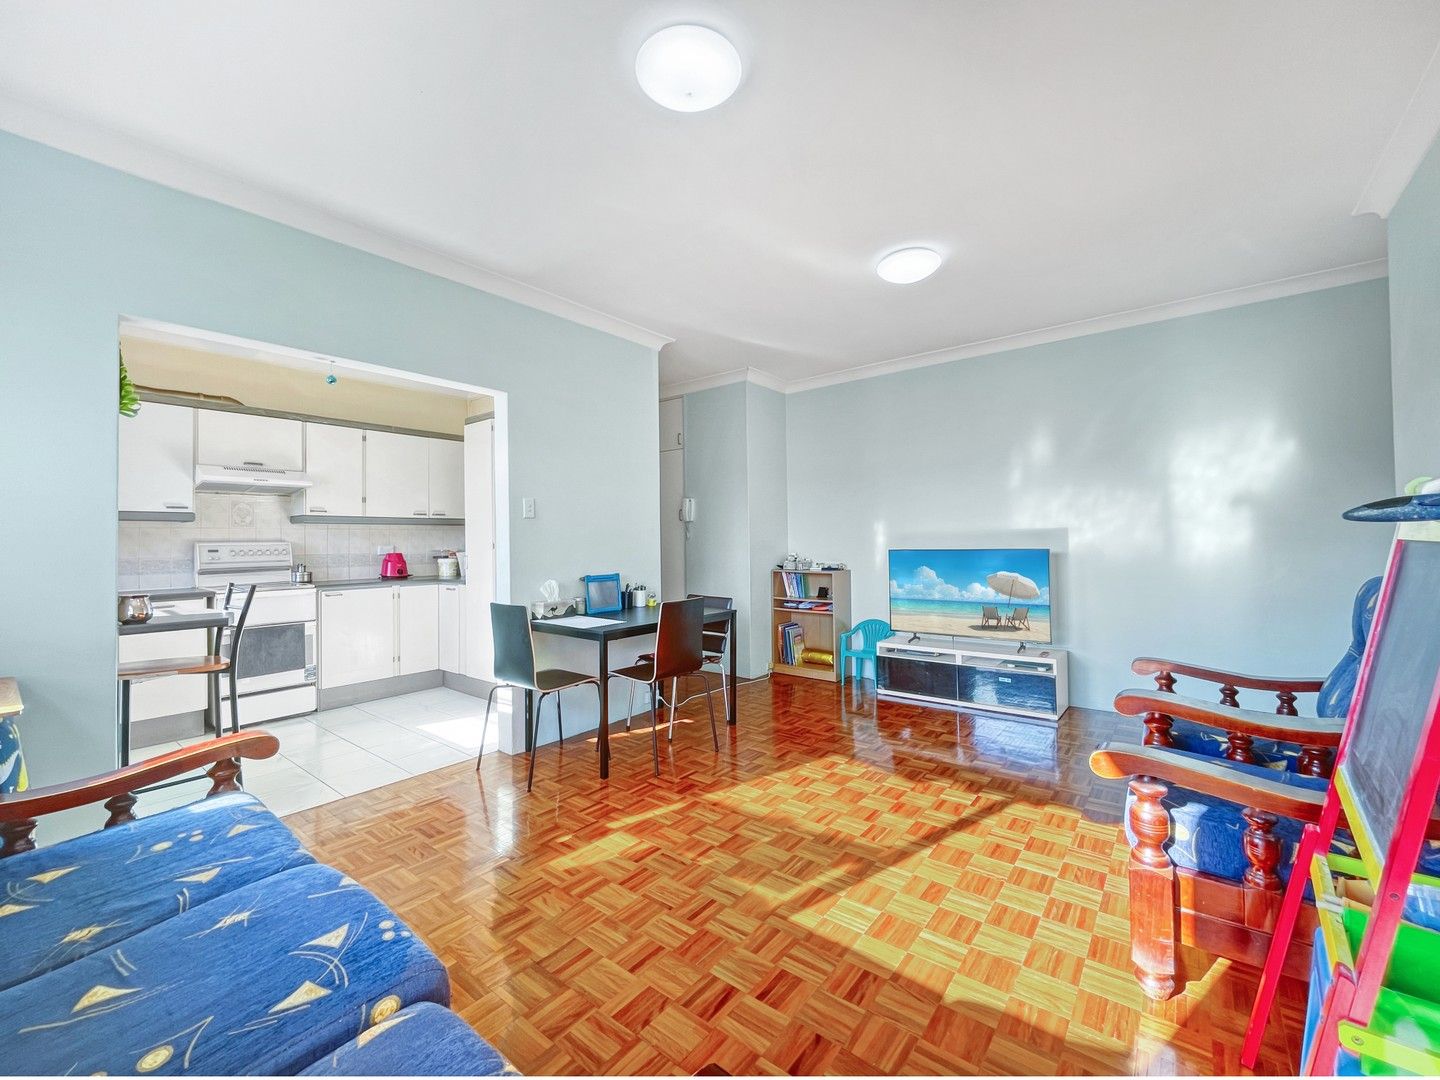 2 bedrooms Apartment / Unit / Flat in 7/2 Mons Avenue WEST RYDE NSW, 2114